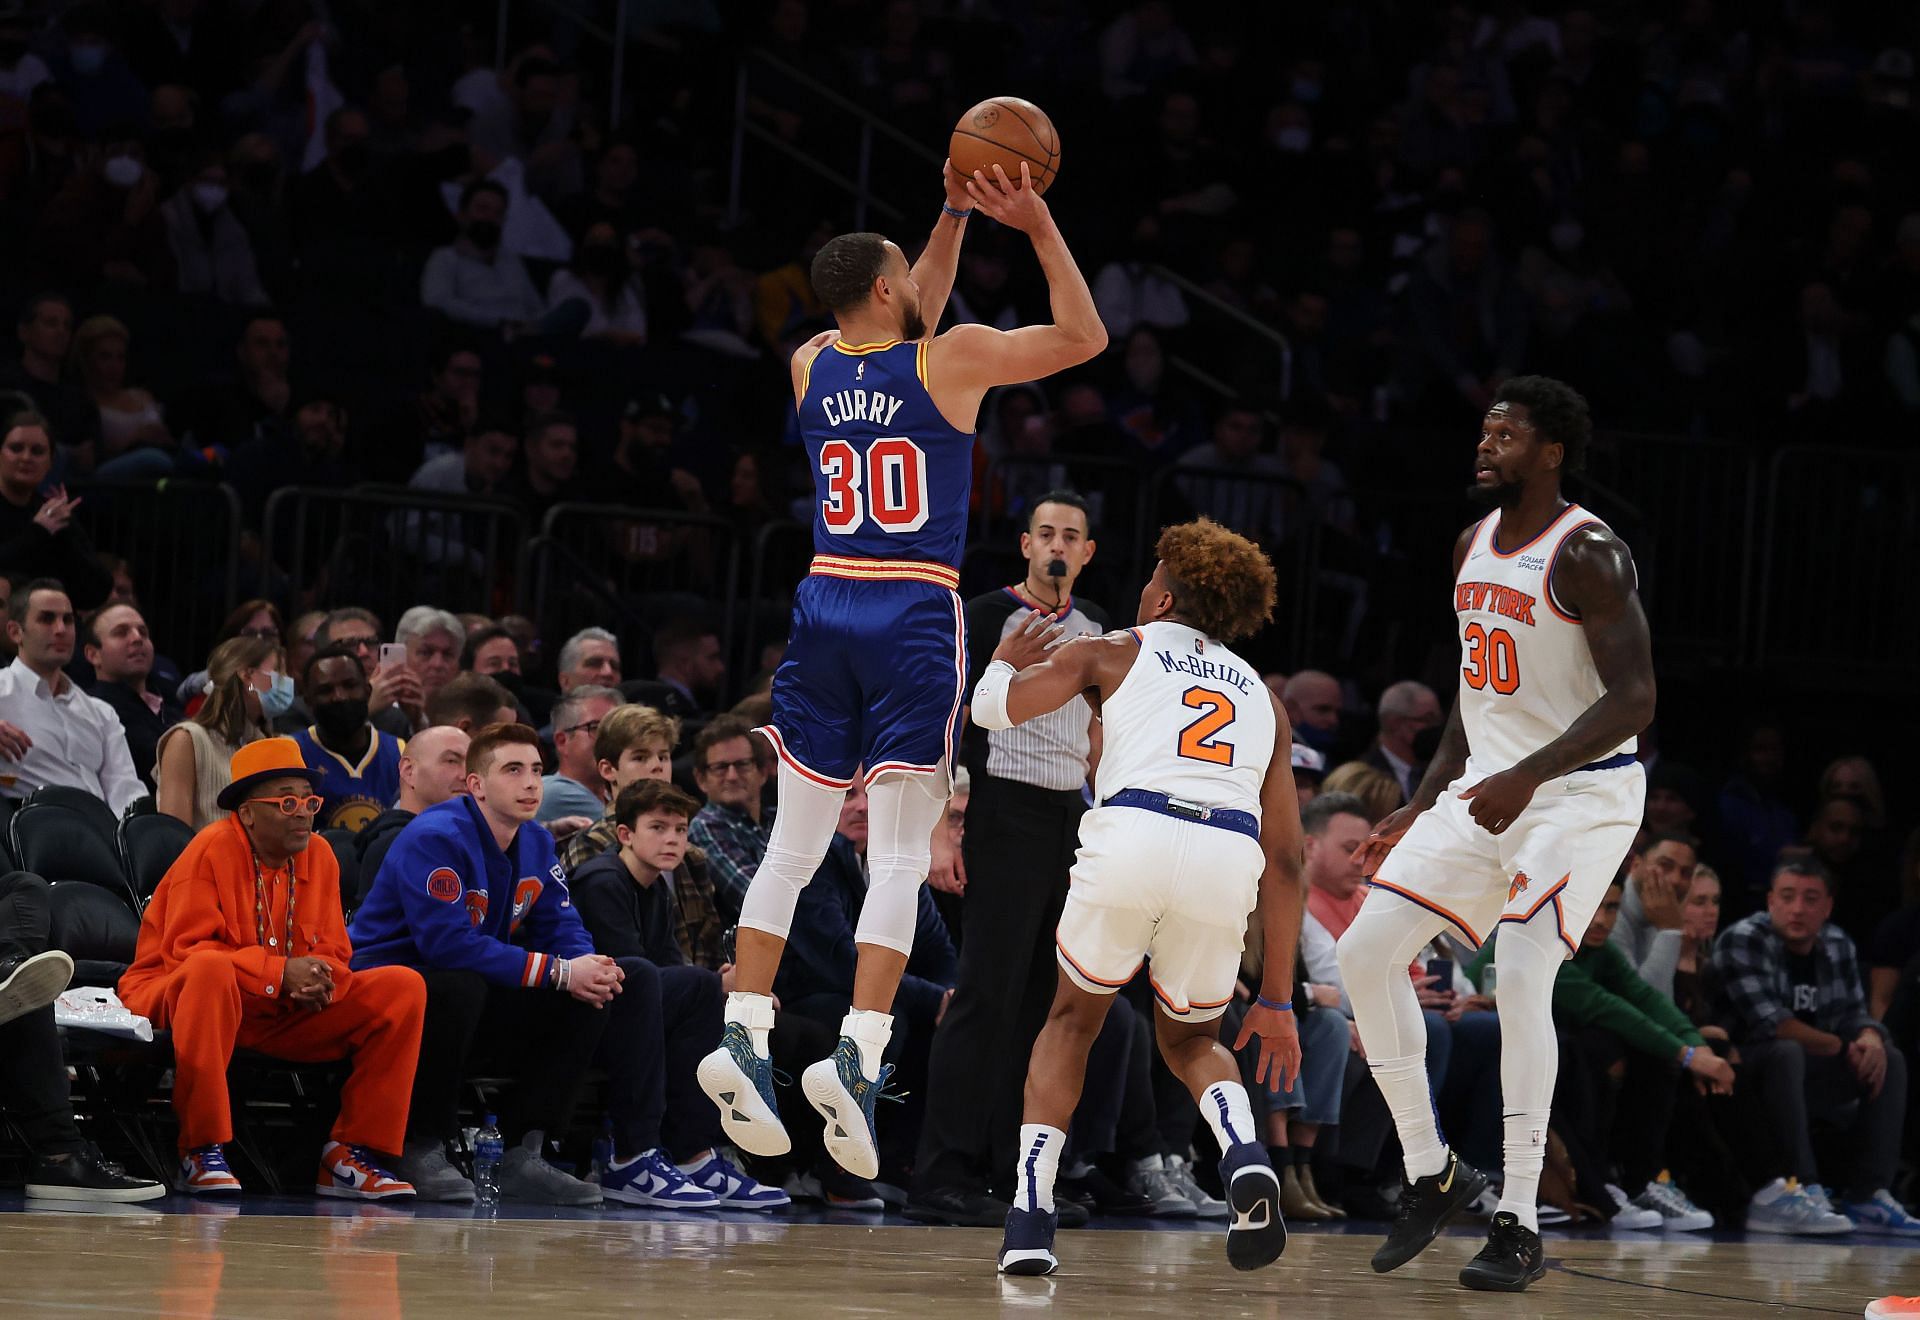 TNT falsely accuses Knicks of passing on Steph Curry in NBA Draft